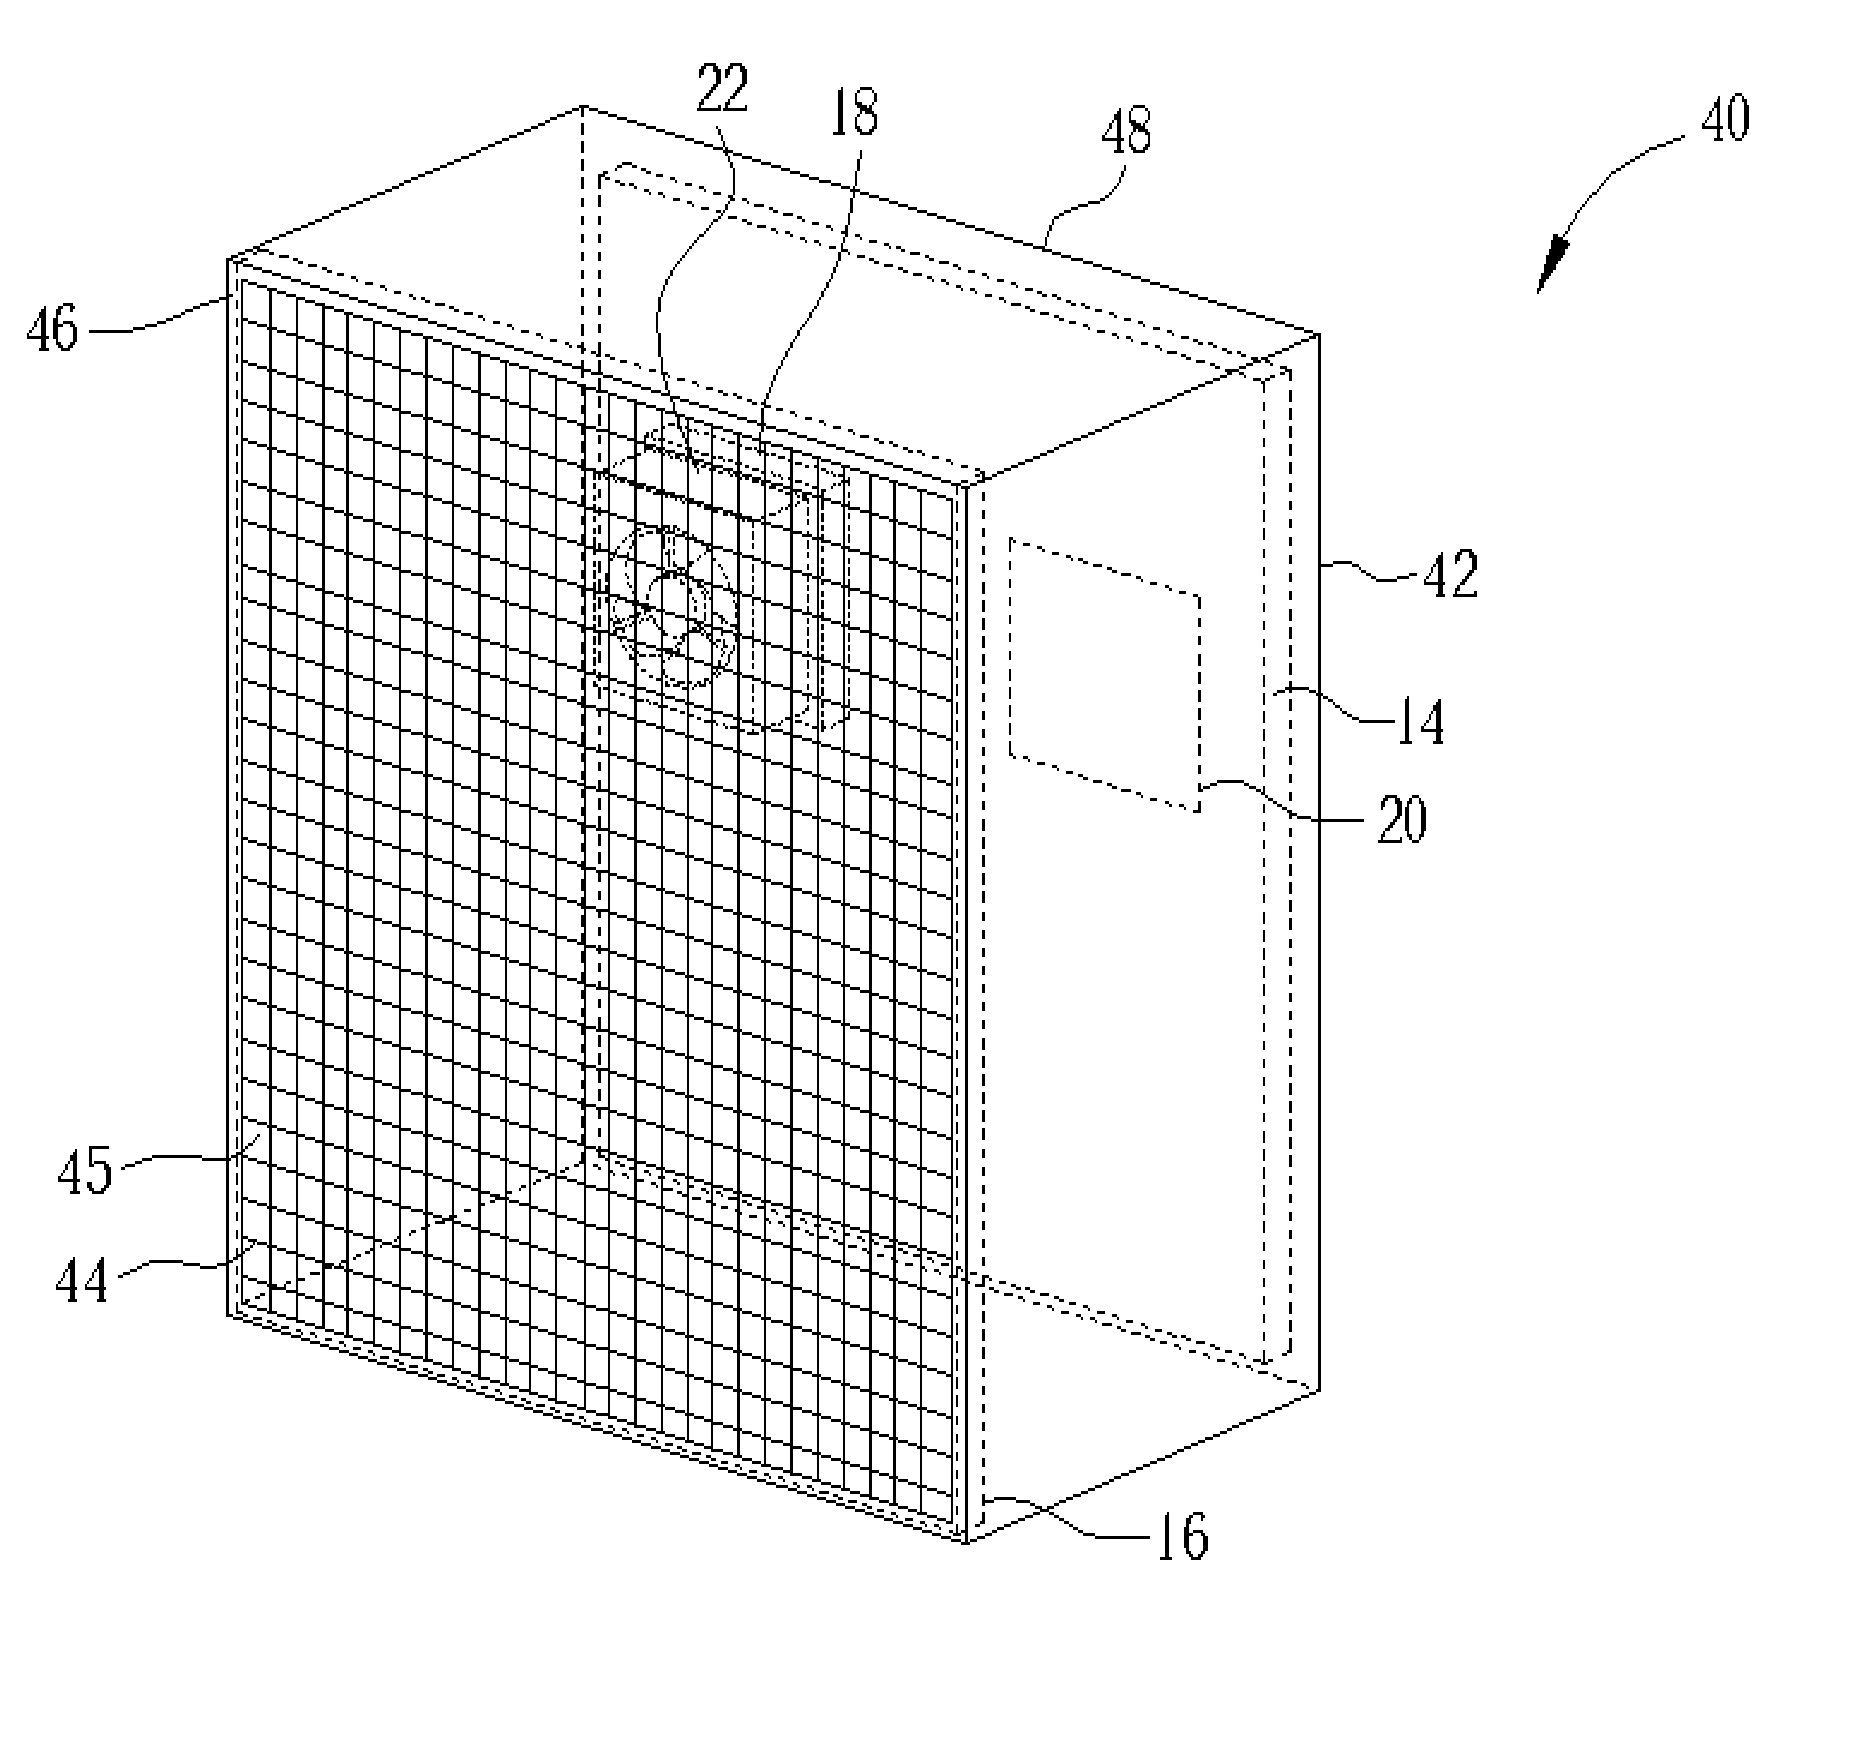 Electronic apparatus with a housing for seeing inside